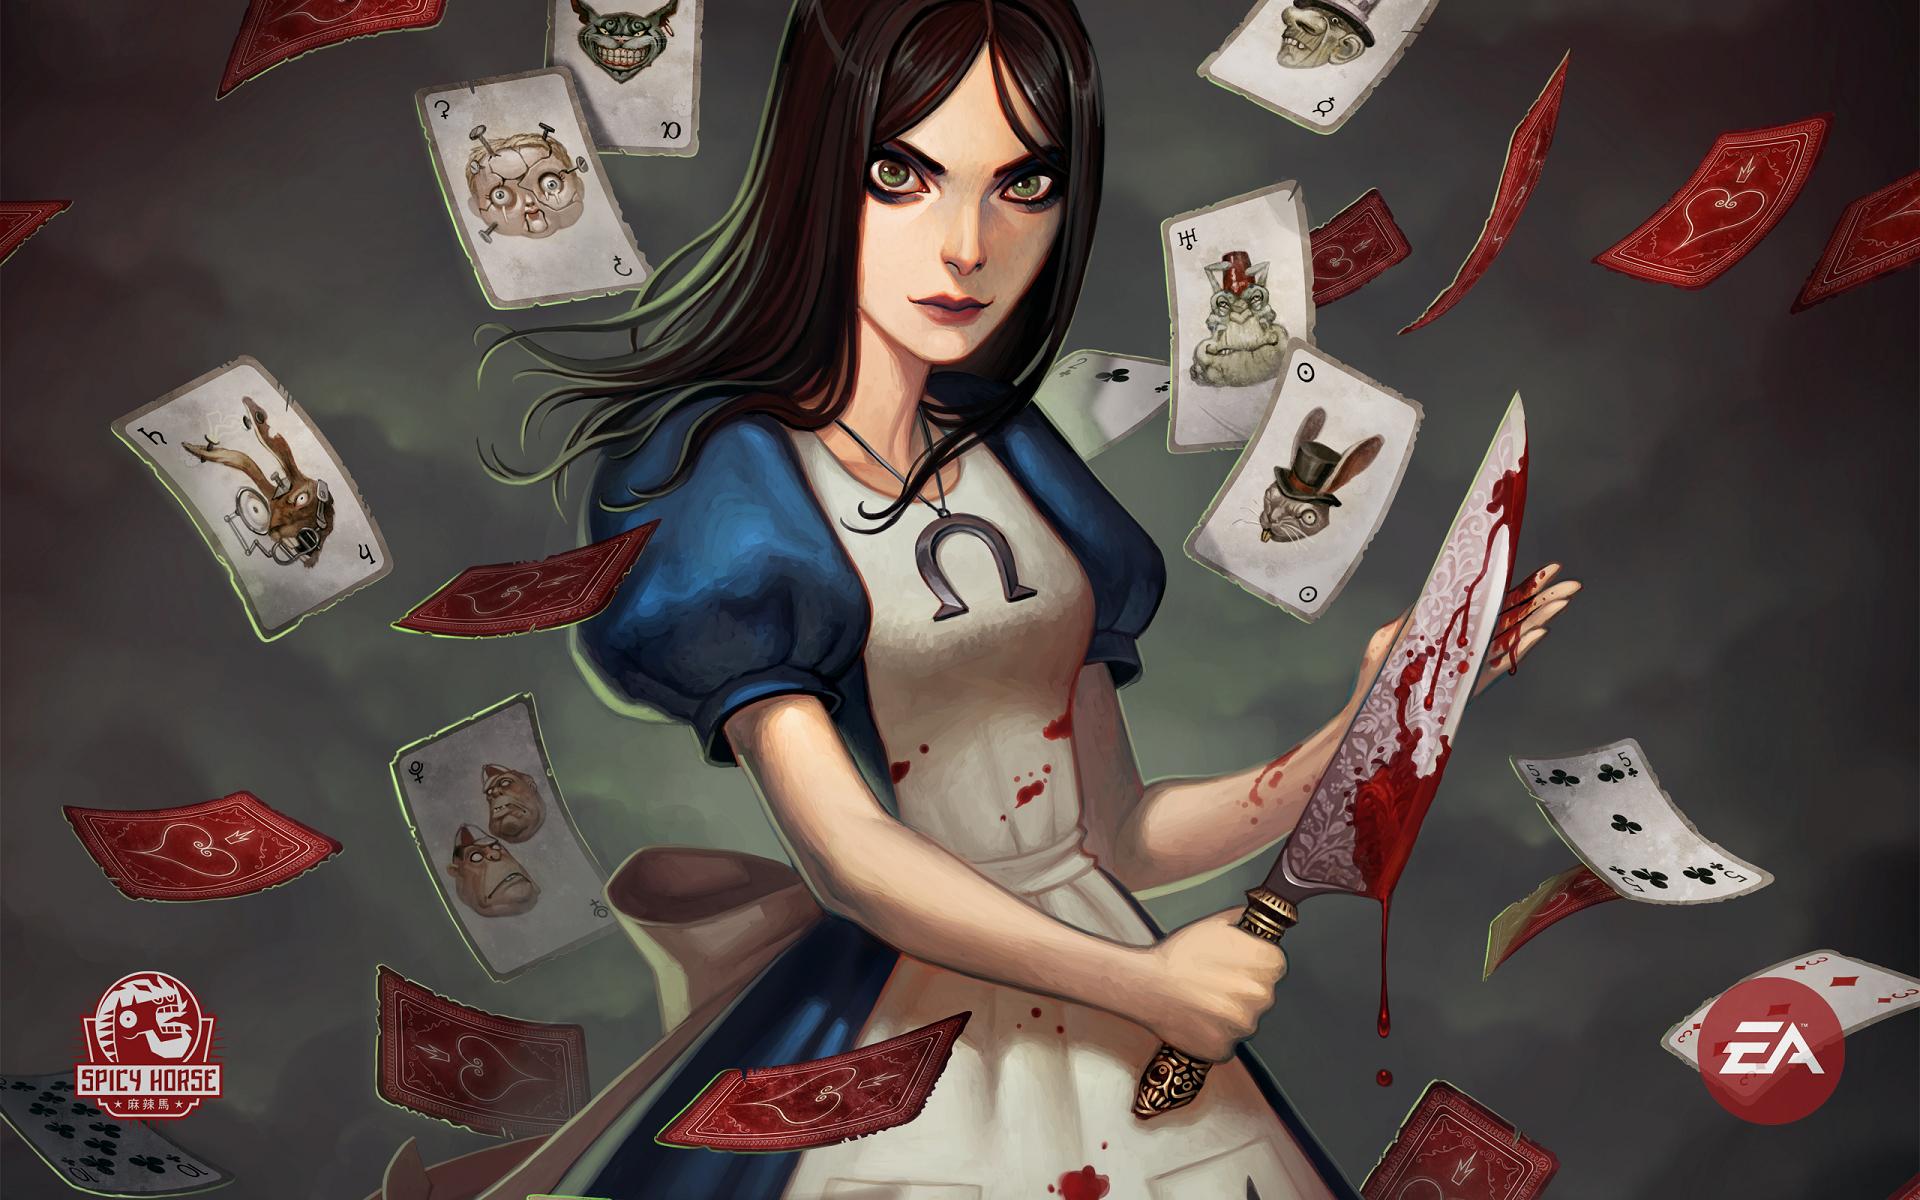 Alice: Madness Returns Collectible Guide - Alice: Madness Returns 